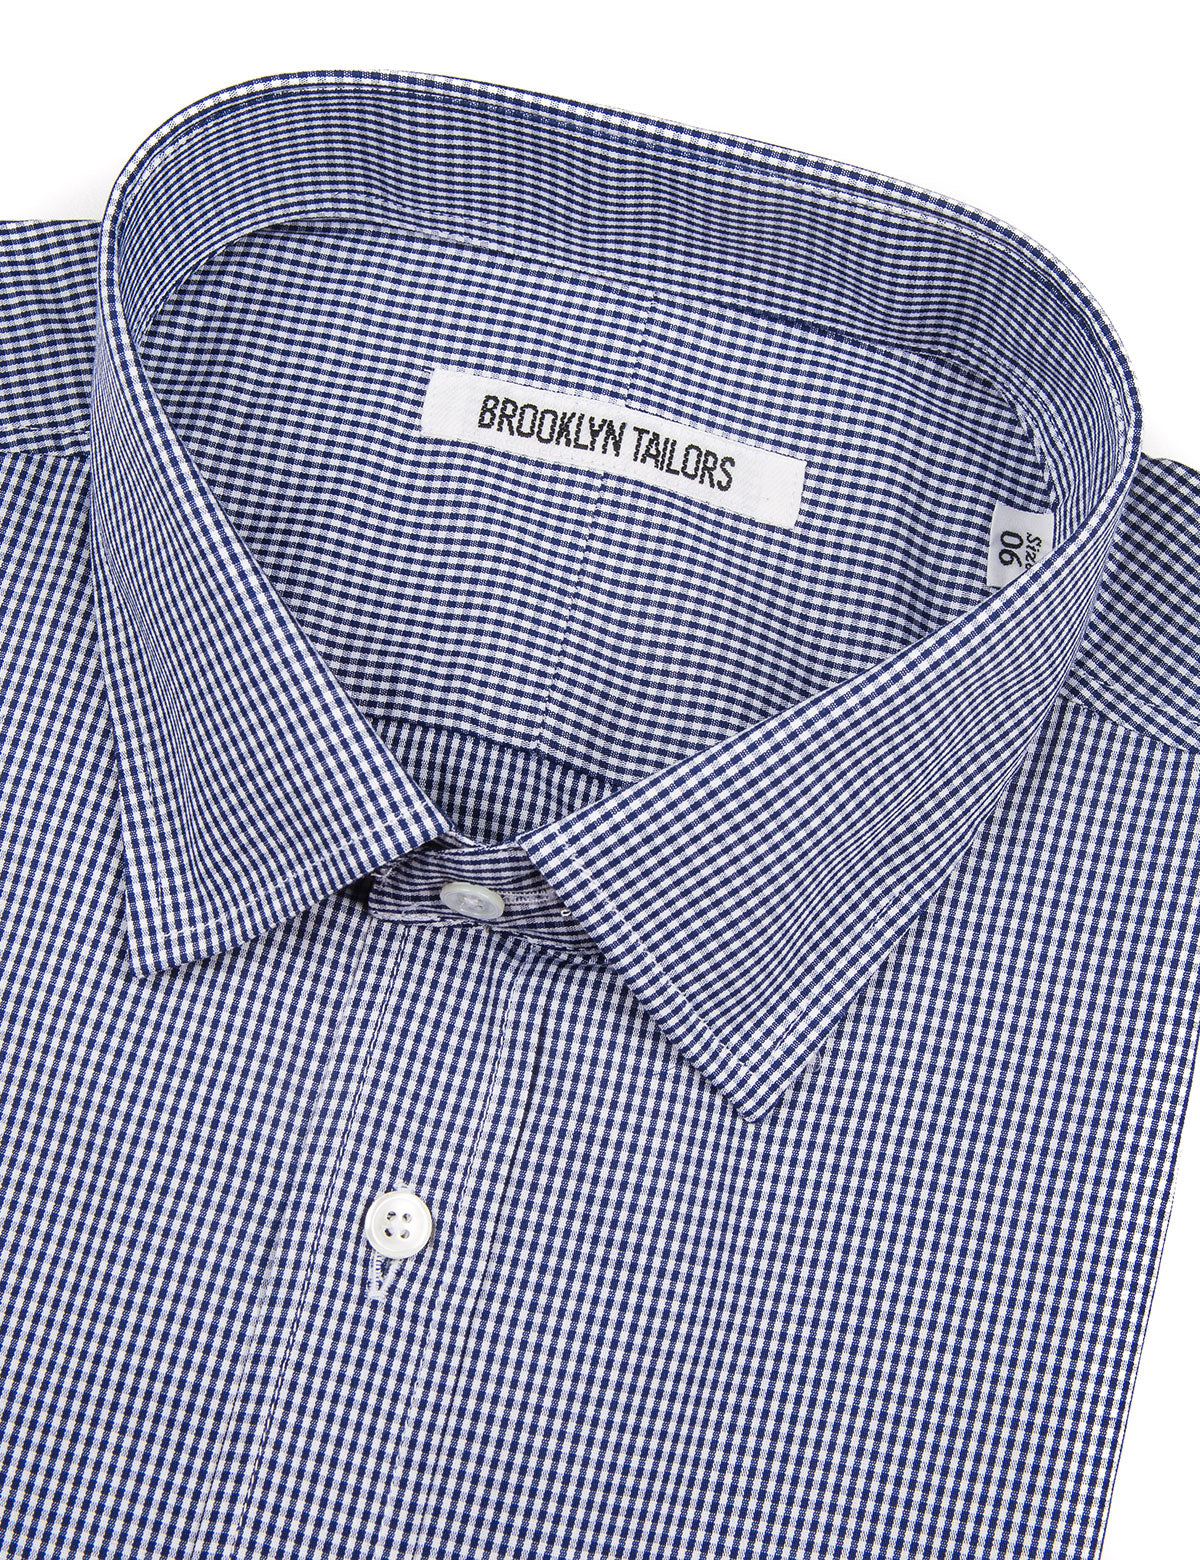 Detail of collar, fabric pattern, and buttons on Brooklyn Tailors BKT20 Slim Dress Shirt in Micro Gingham - White and Navy